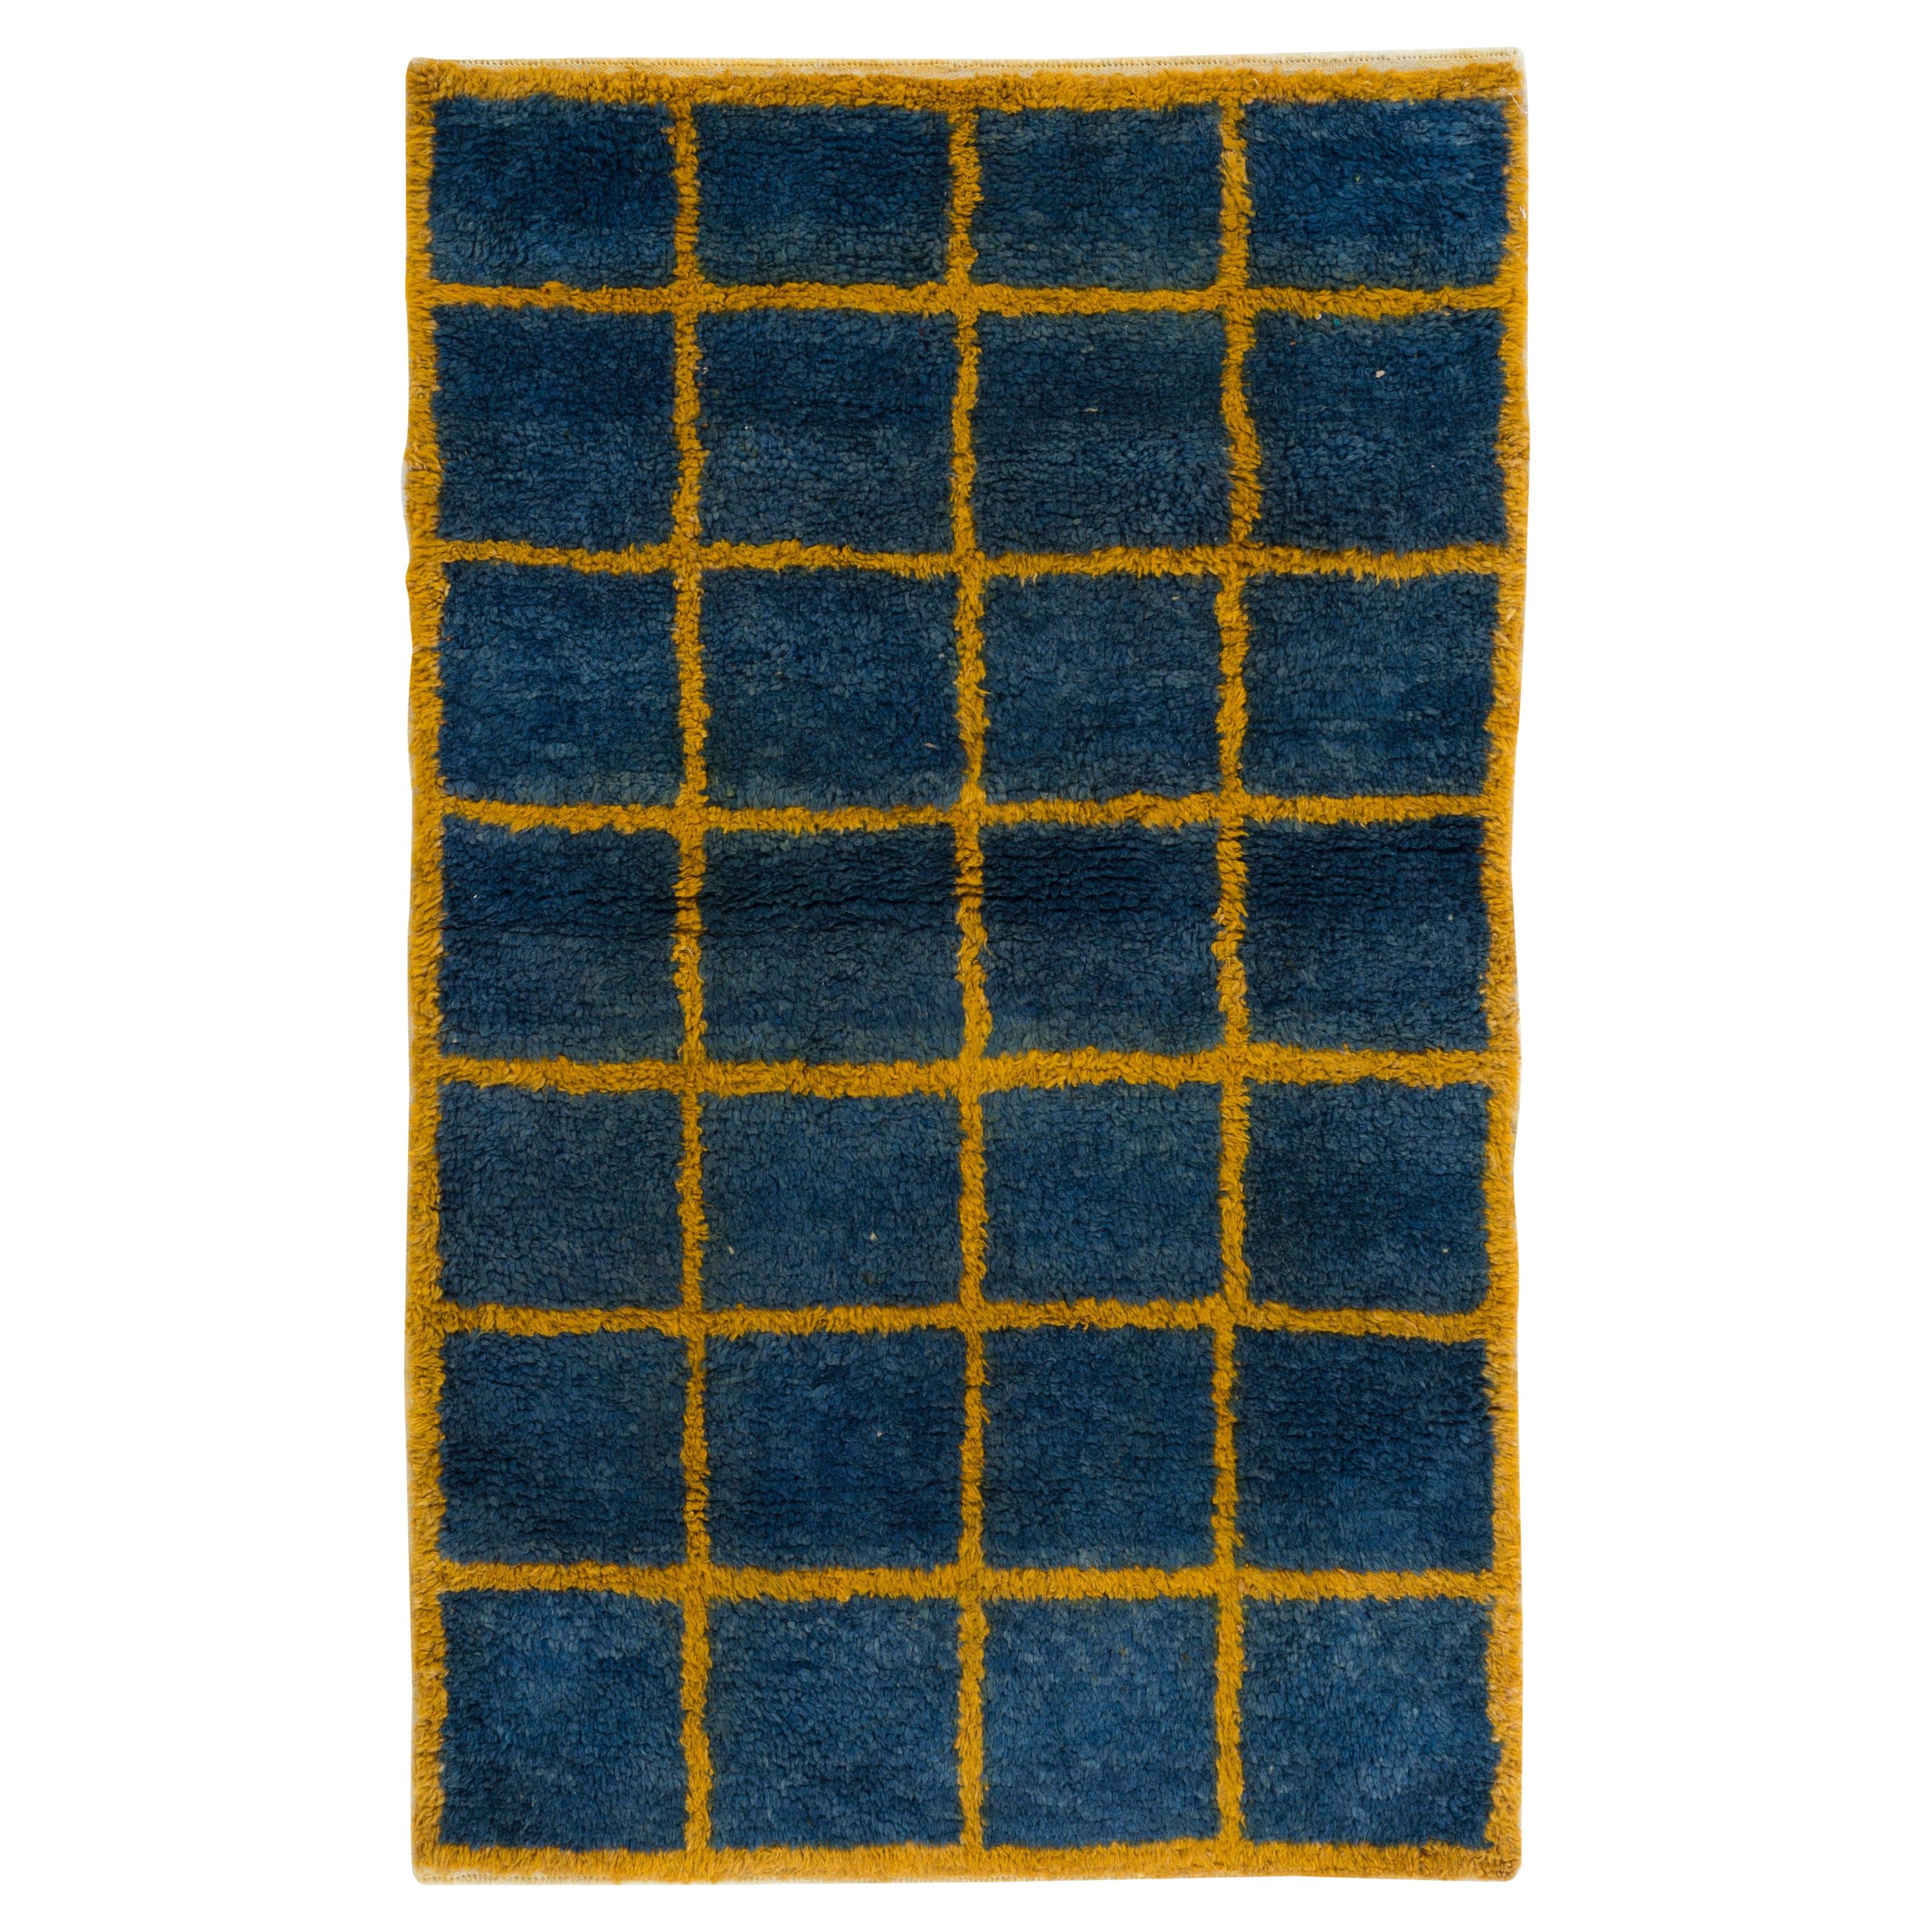 4x6.6 Ft Vintage Checkered 'Tulu' Rug in Blue & Yellow, Custom Options Available